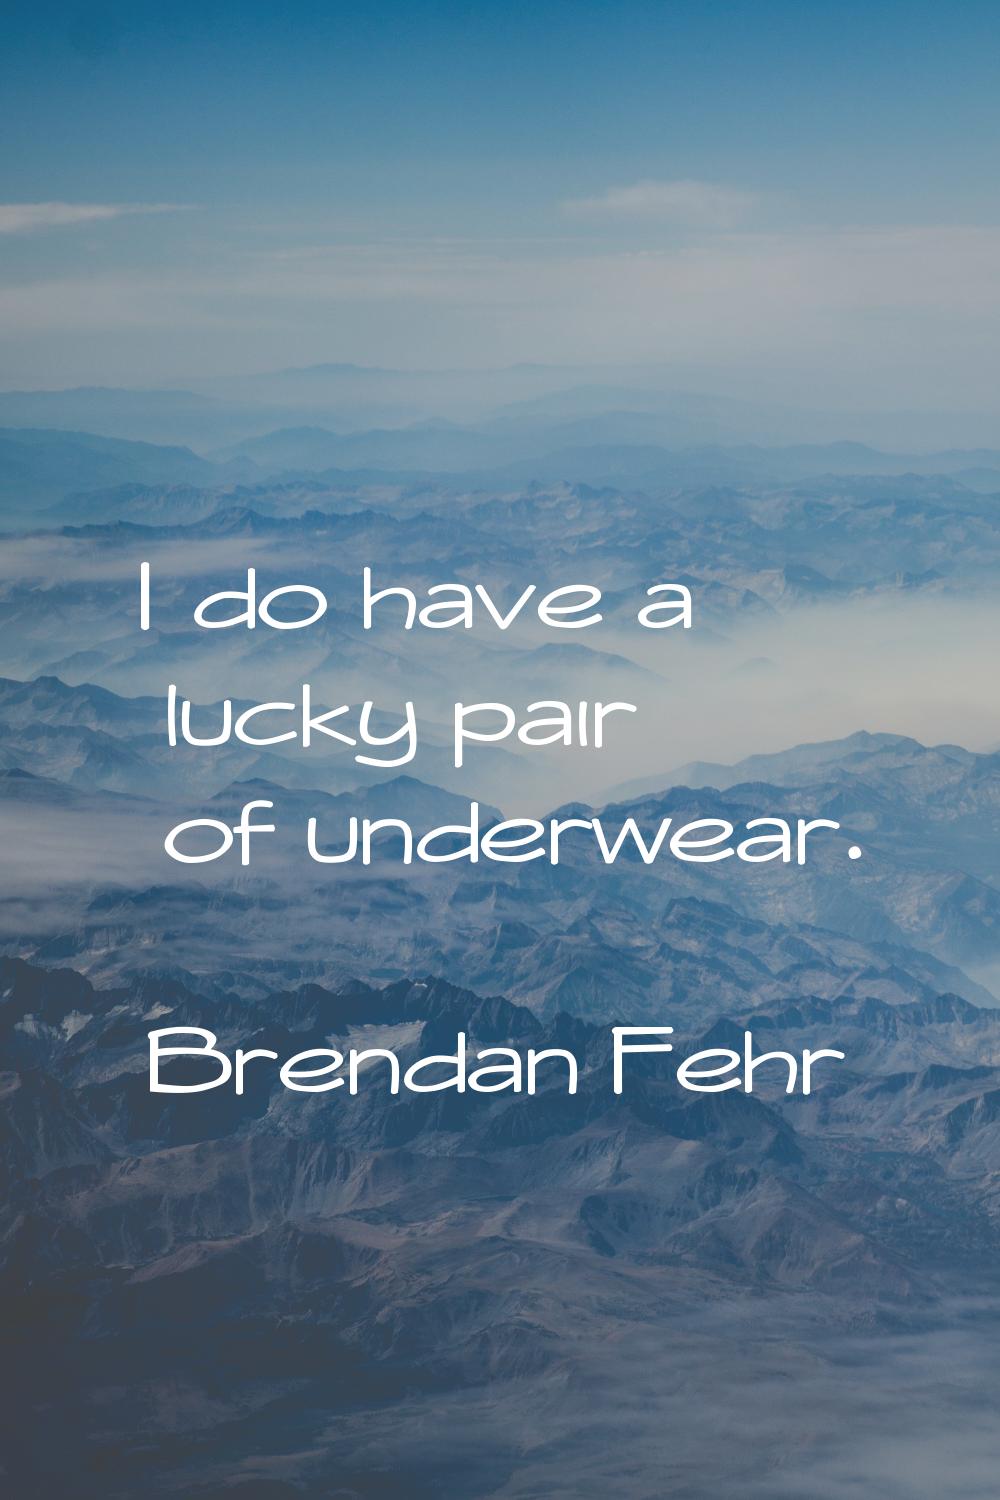 I do have a lucky pair of underwear.